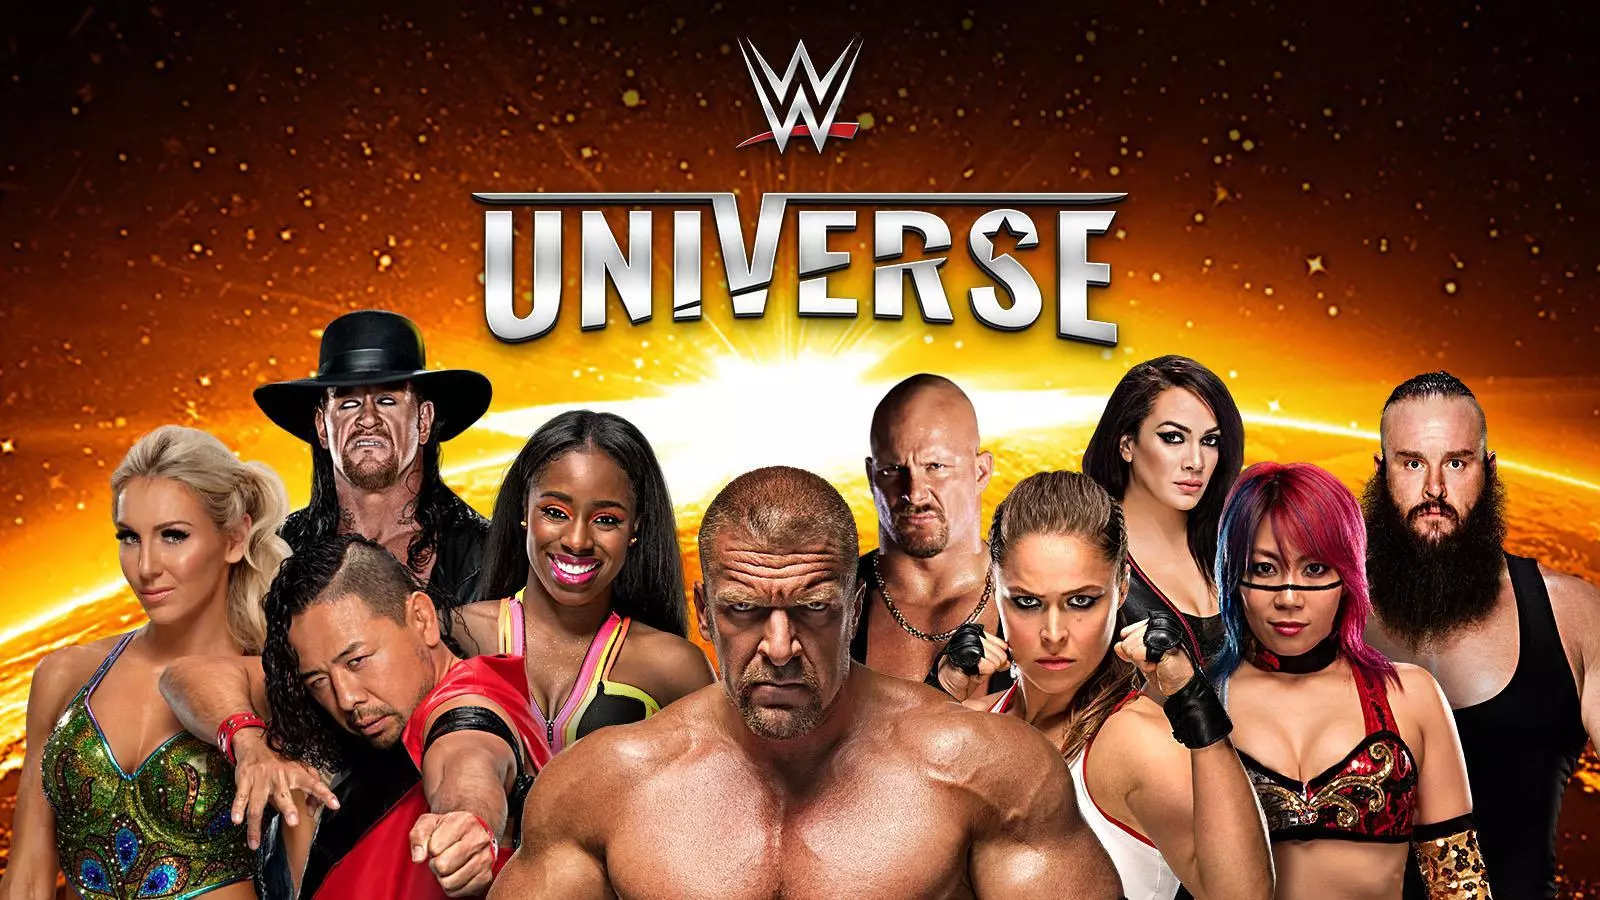 New Mobile Game 'WWE Universe' Now Available for Download on iOS &amp; Android - All Details &amp; Trailer